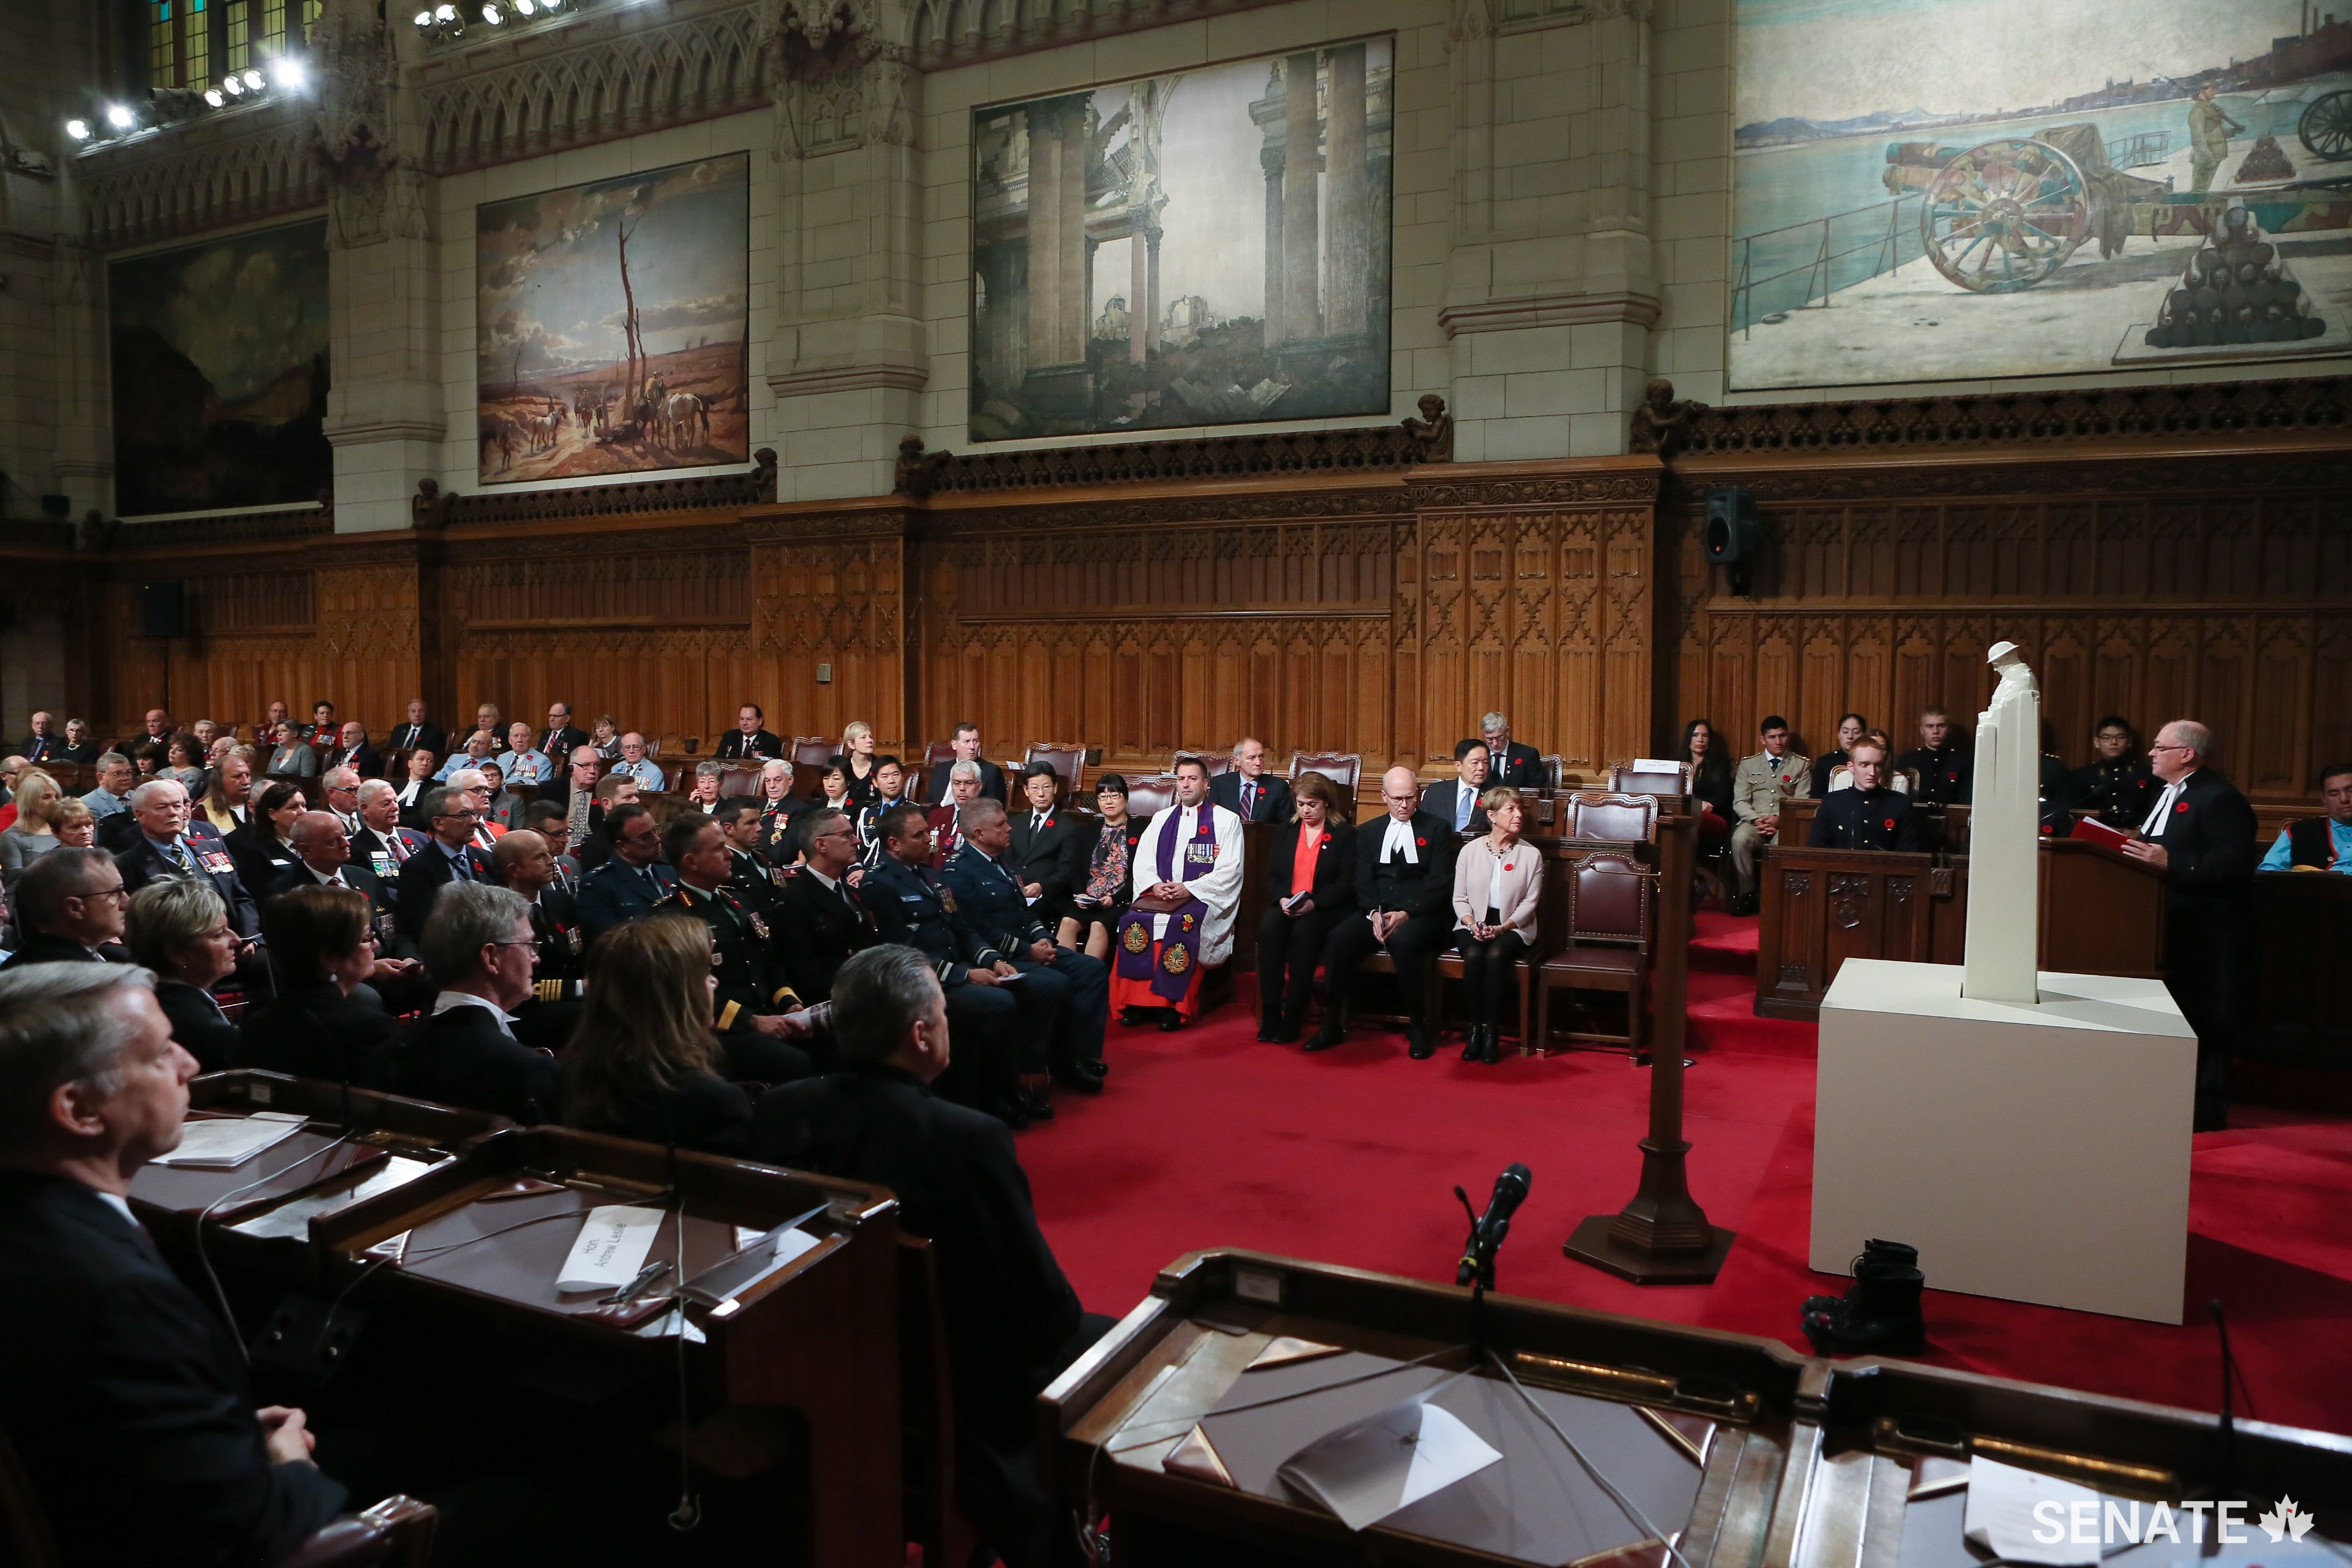 Speaker George J. Furey addresses a full Senate Chamber, speaking to the debt Canadians owe to our men and women in uniform.